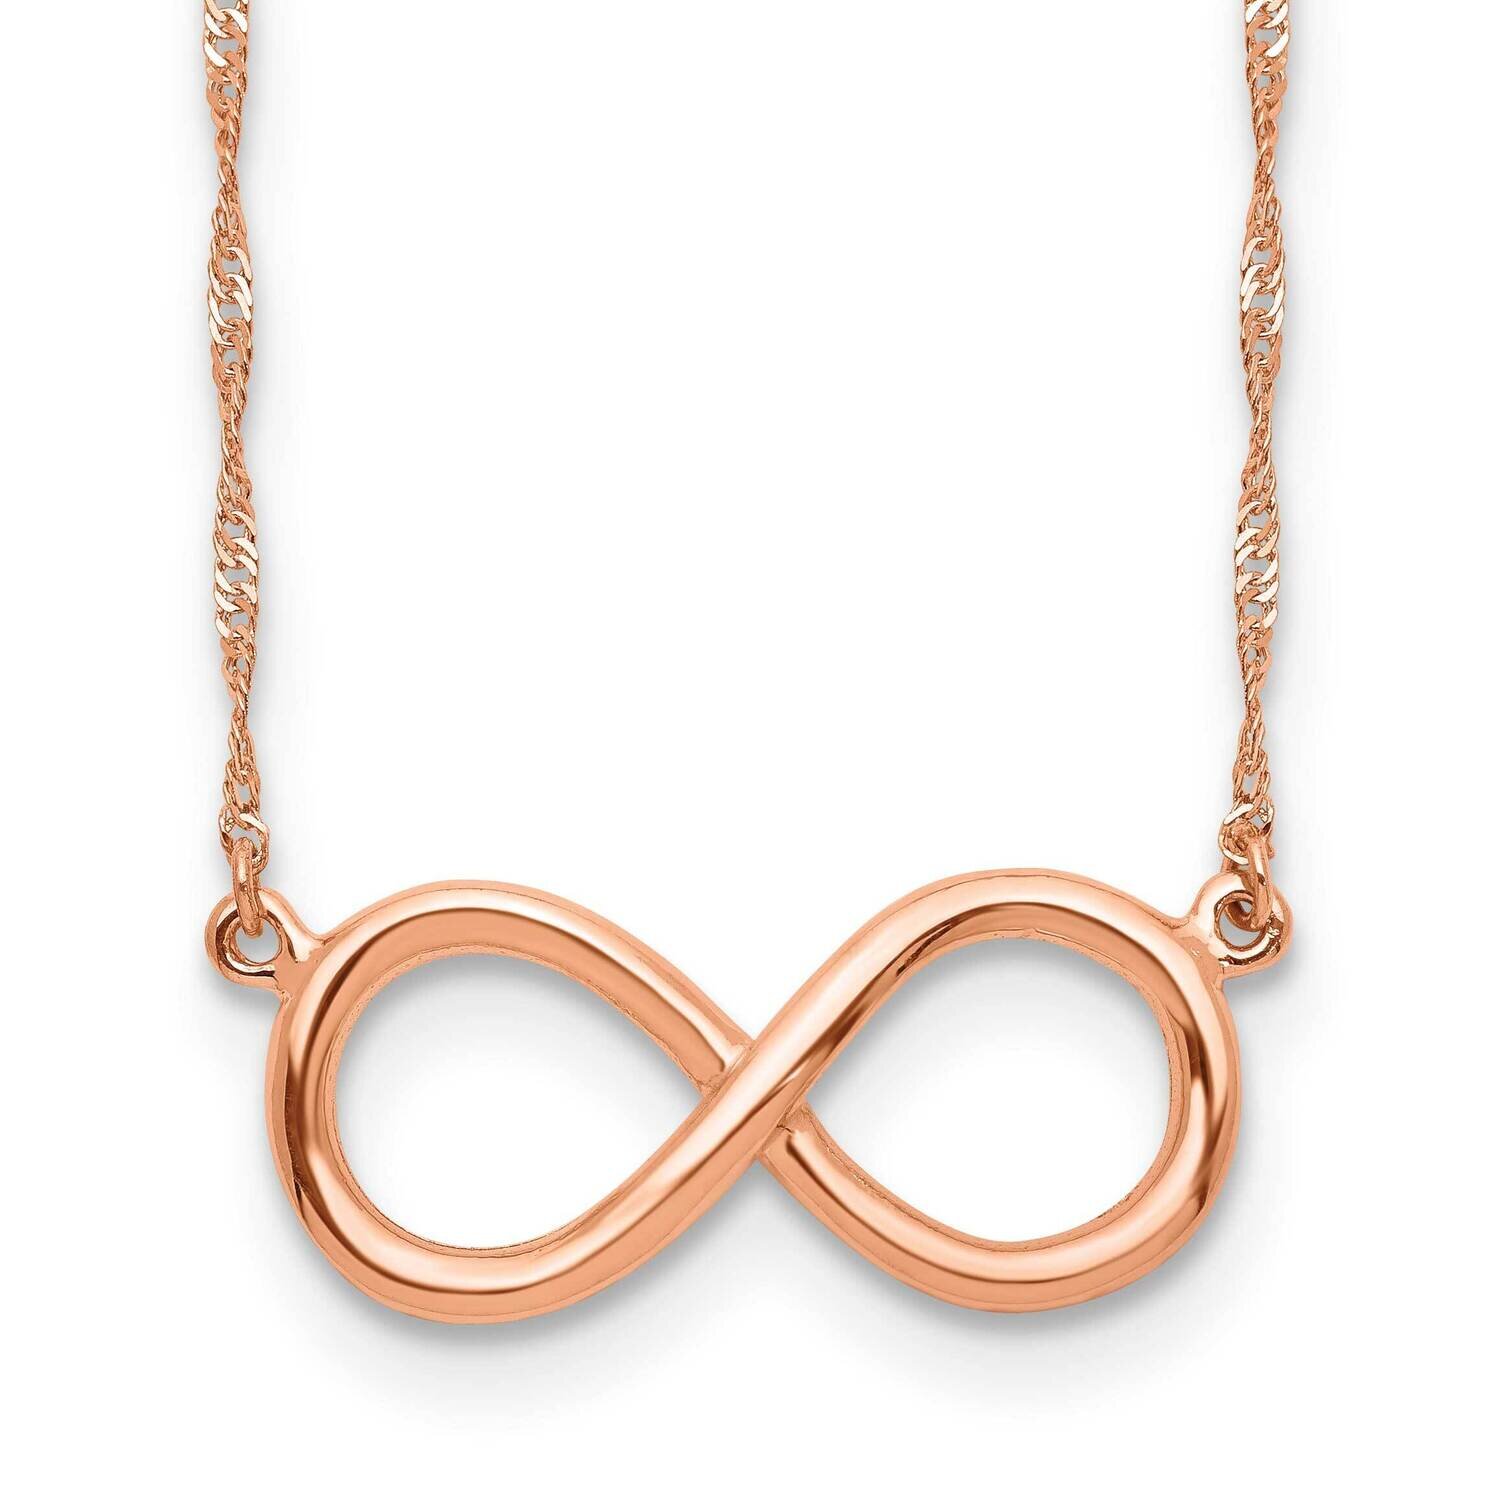 Rose Polished Infinity Necklace 14k Gold SF2650-16.5